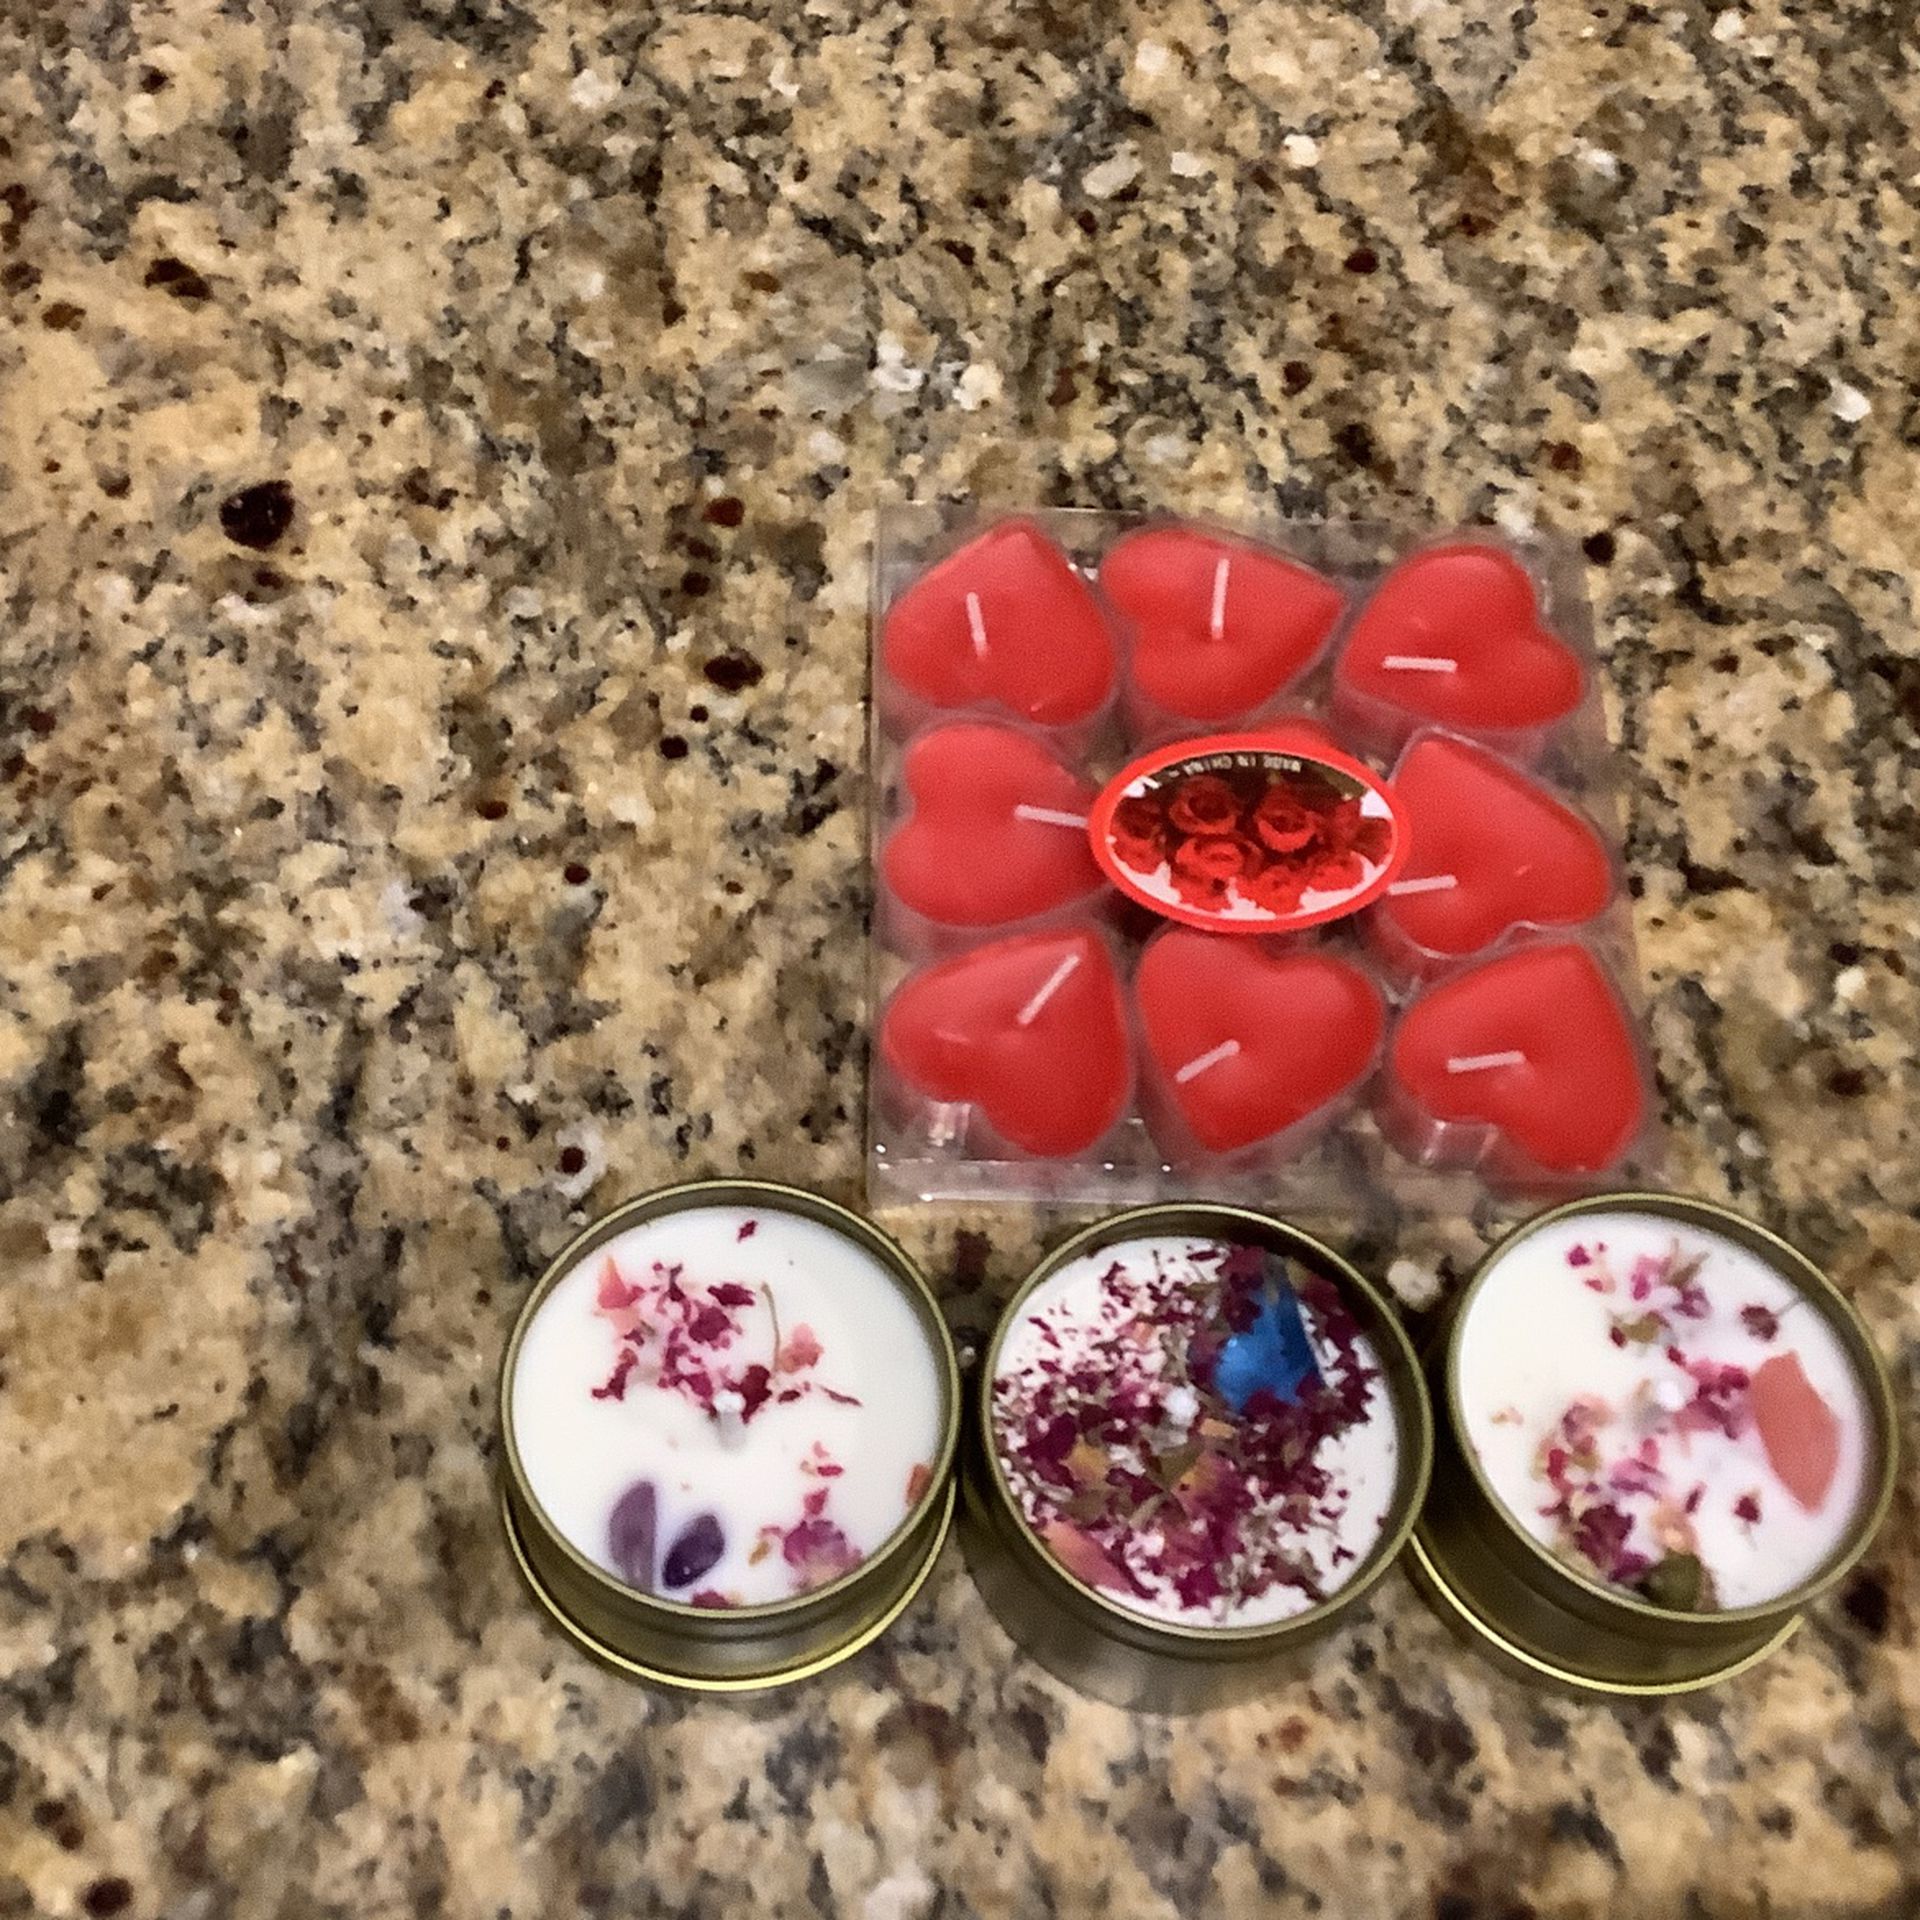 Scented Candles With Flowers And Gemstones In It 